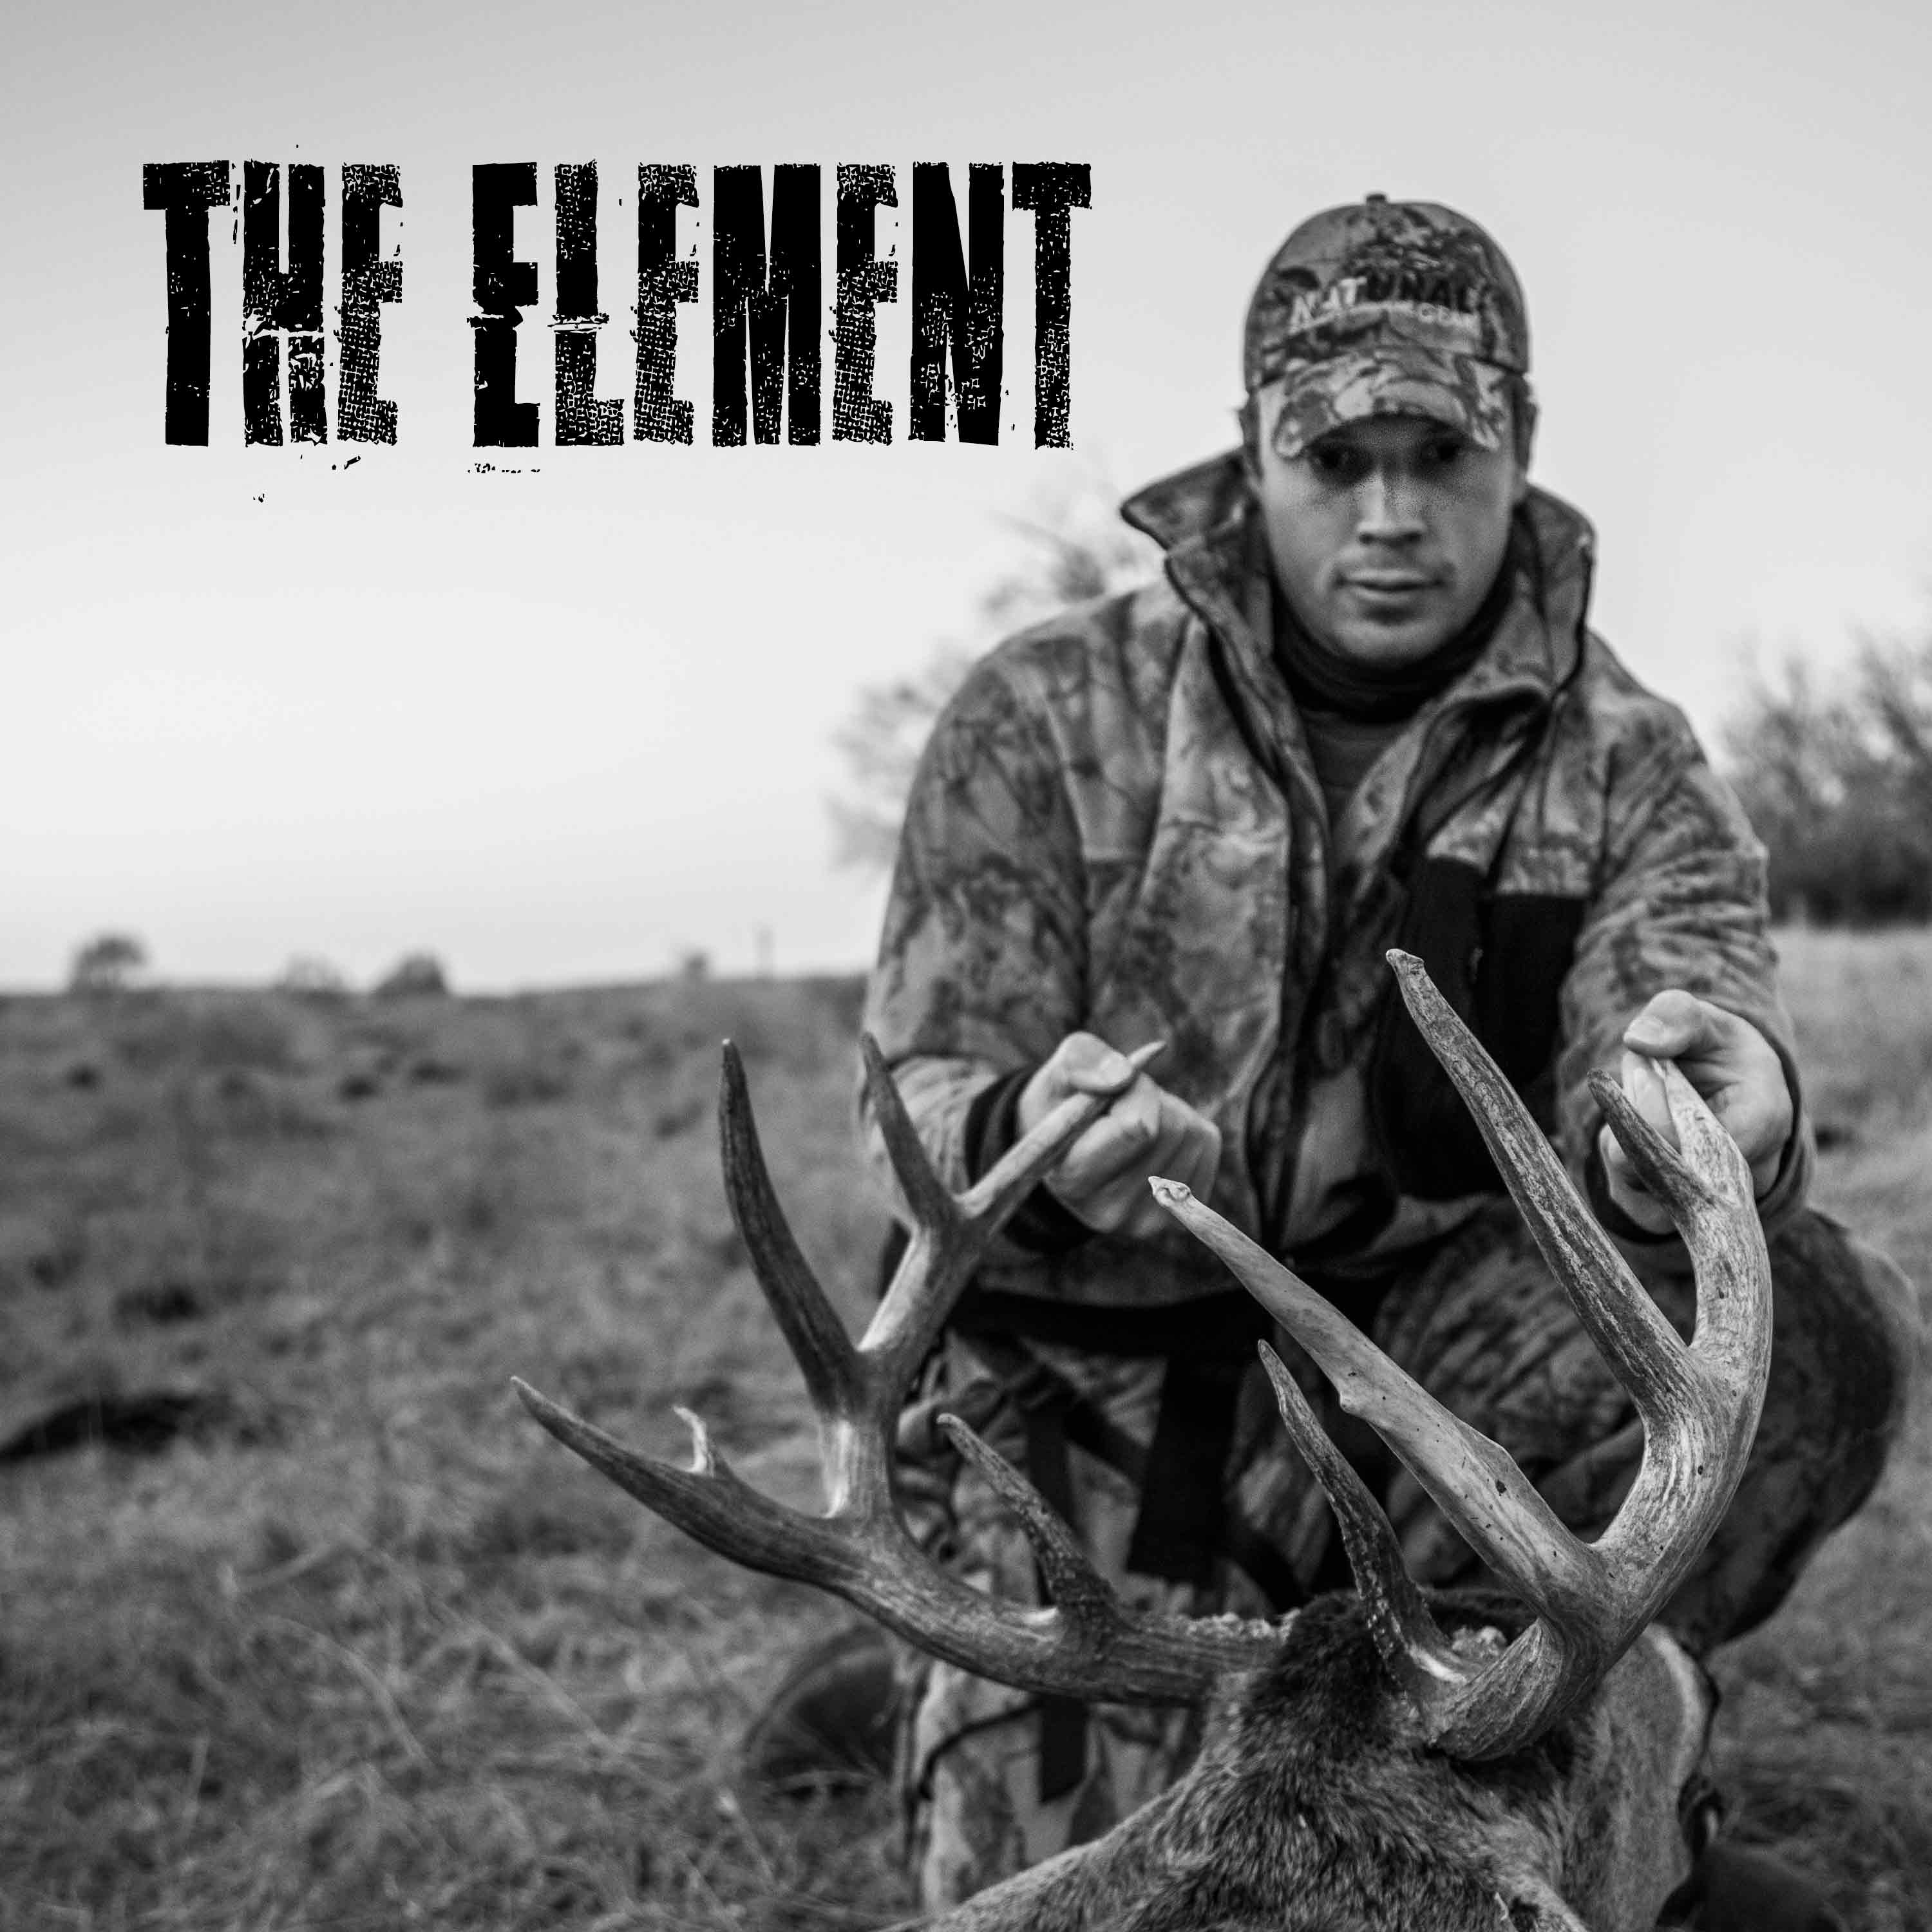 E215: Success Hunting in the EARLY SZN! (feat. Shawn Luchtel of Heartland Bowhunter on How to Hunt Deer Over Food Sources In Bow Season, Big Bucks in Beans, Corn, and Clover)